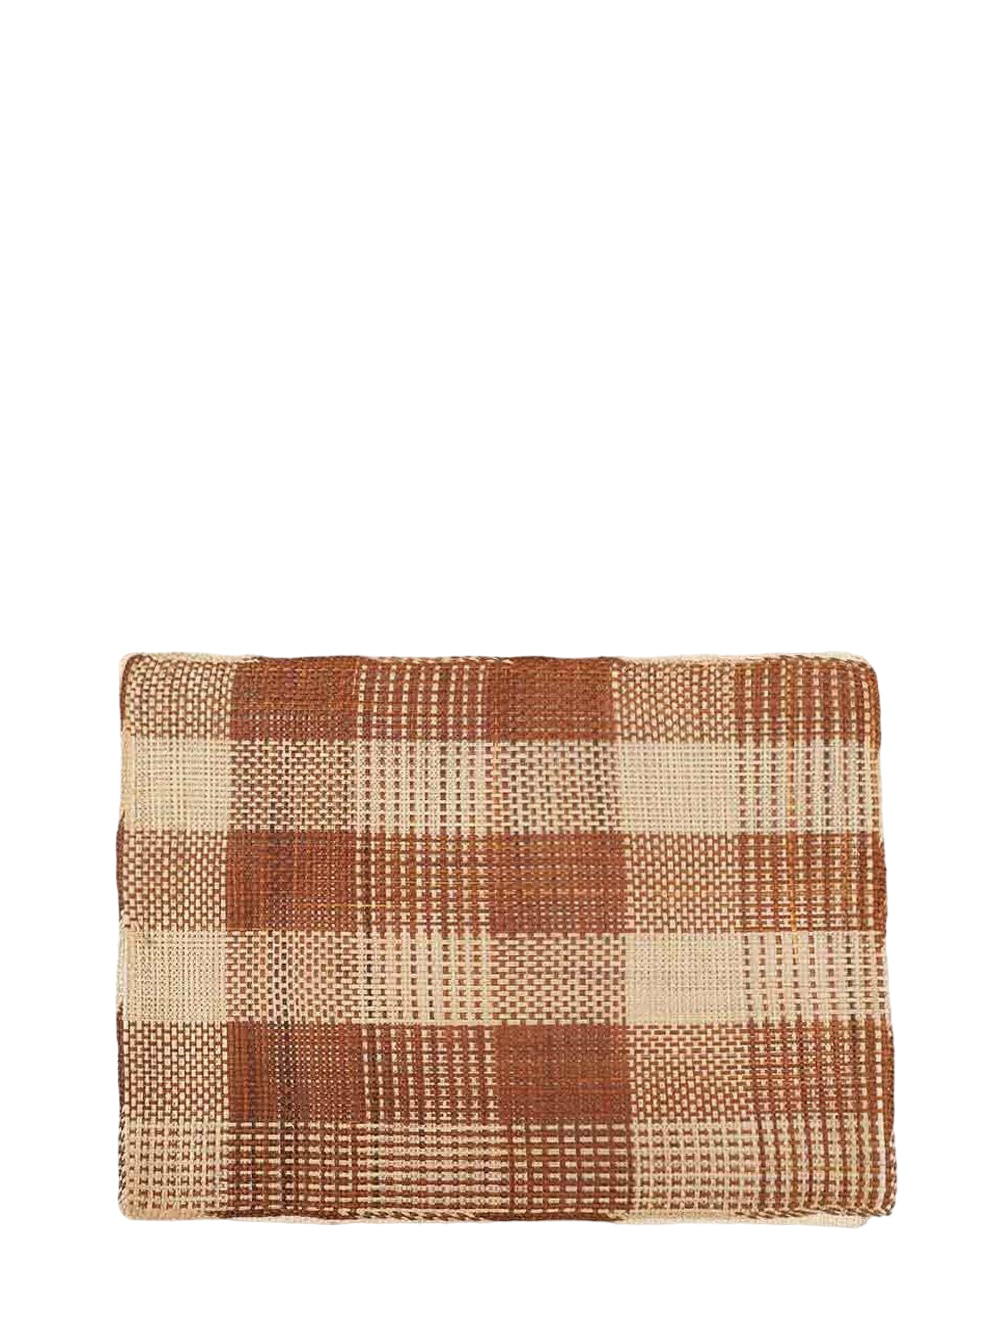 Straw placemat, terracotta & natural